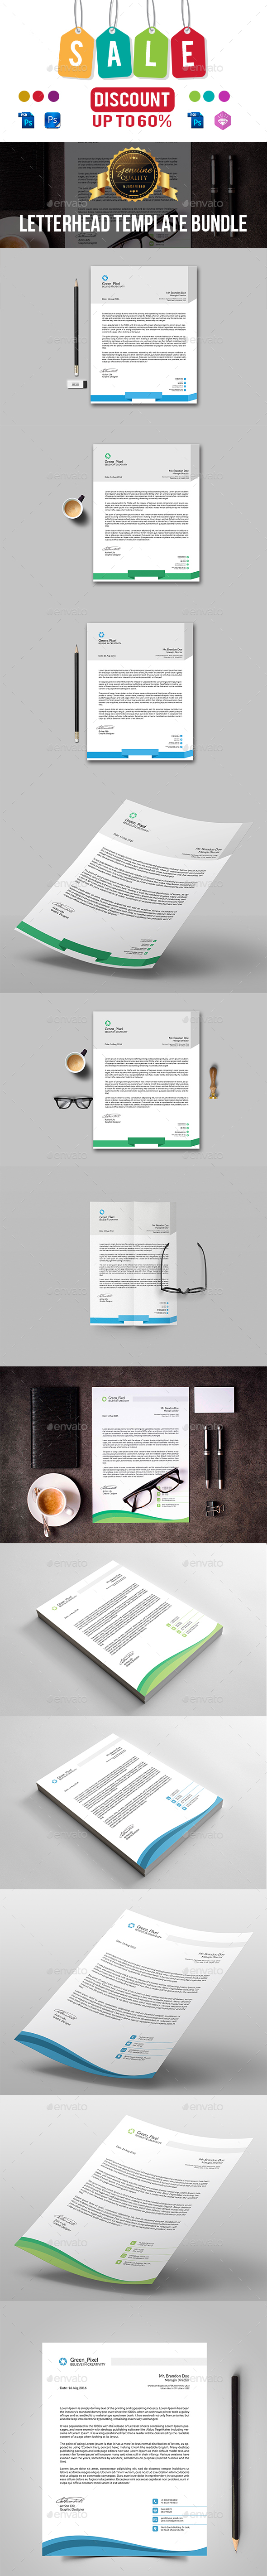 Letterhead Bundle in Stationery Templates